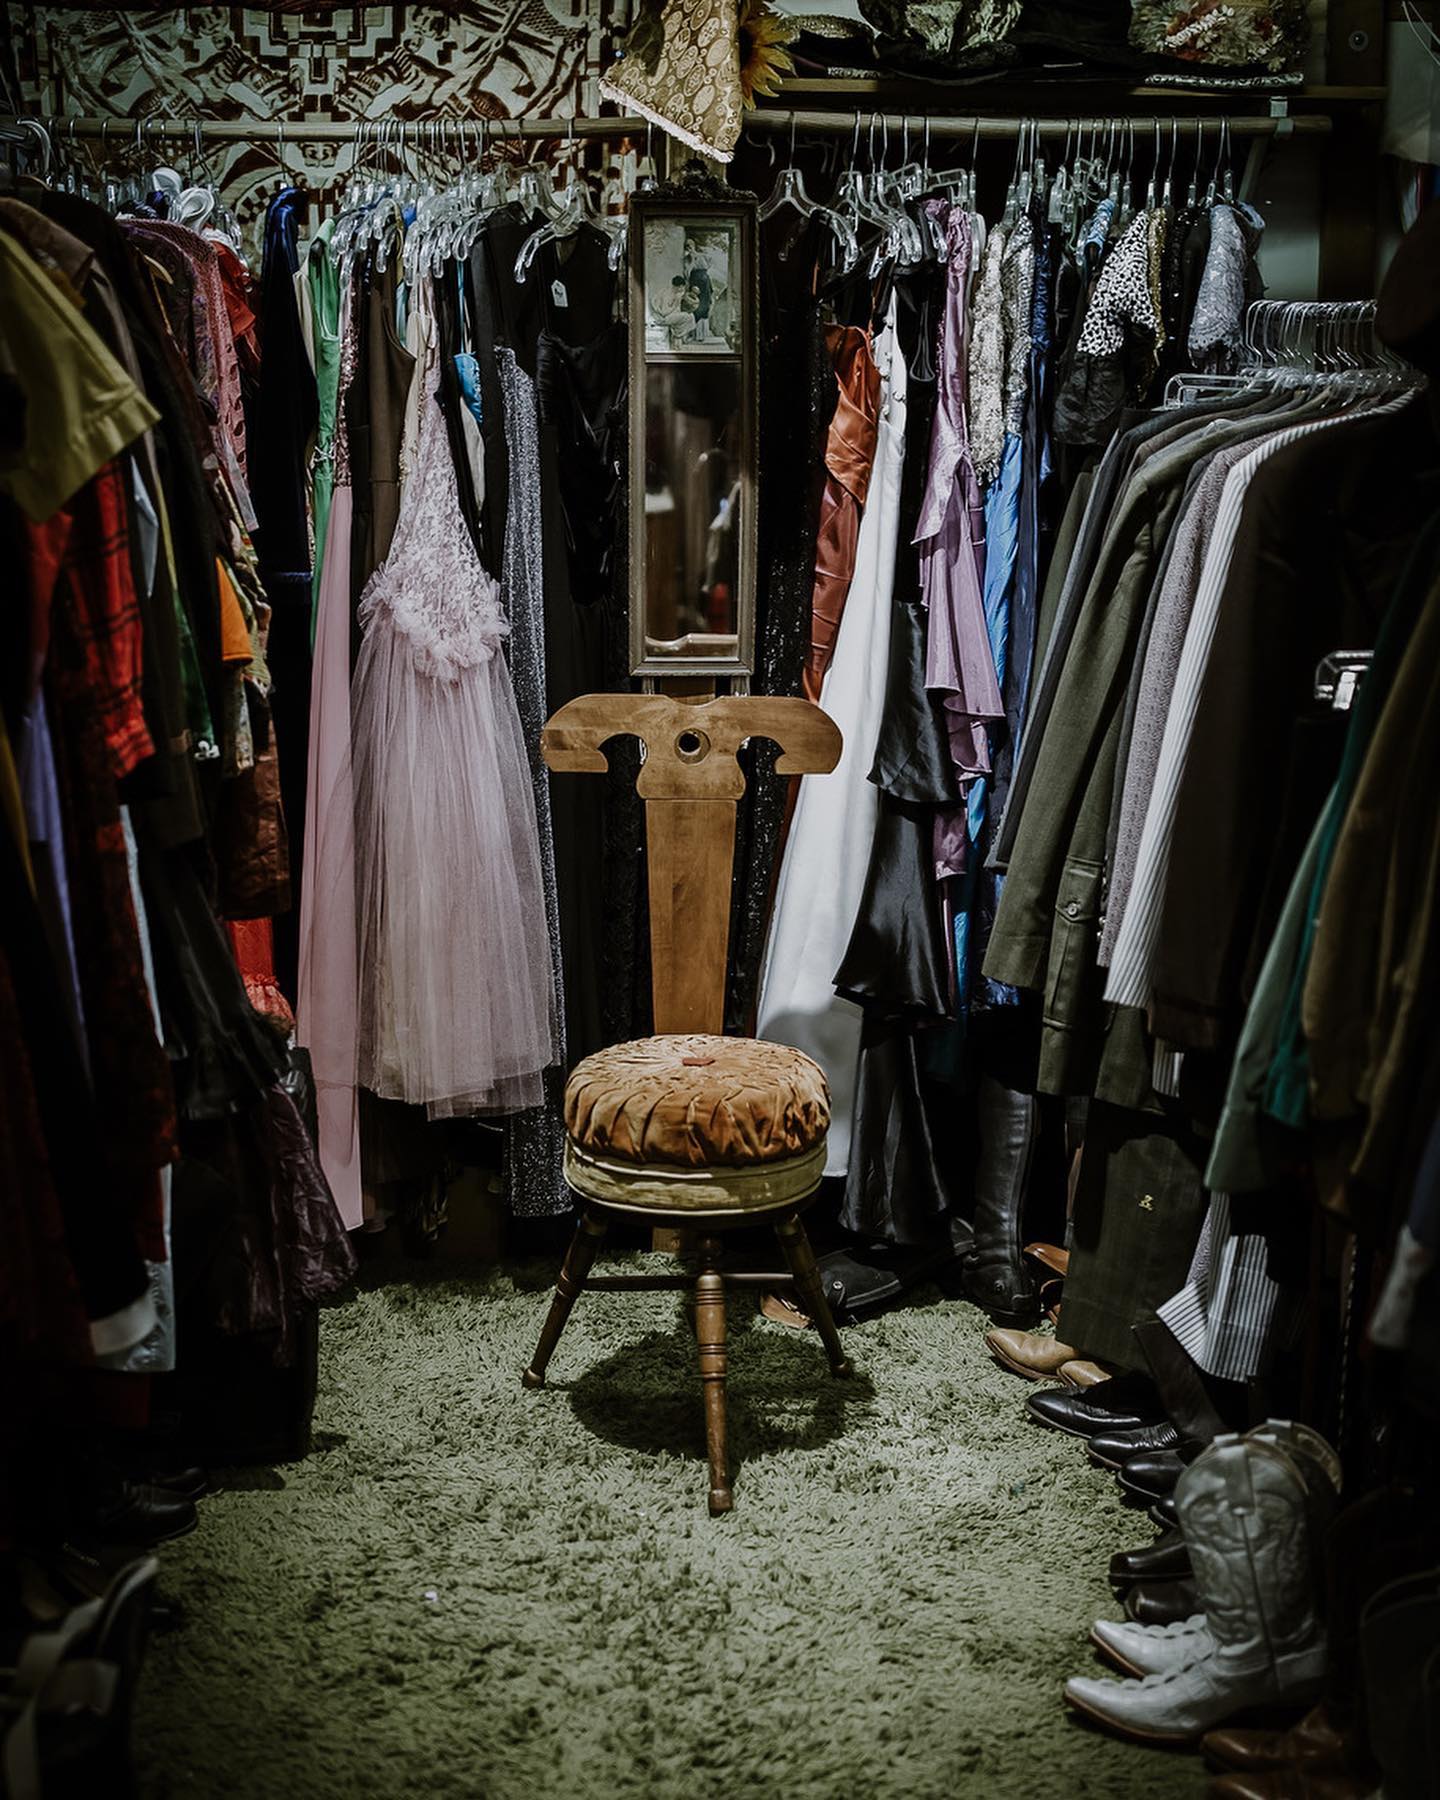 A unique chair is surrounded by hanging clothes in the Great Eastern Trading Co. 